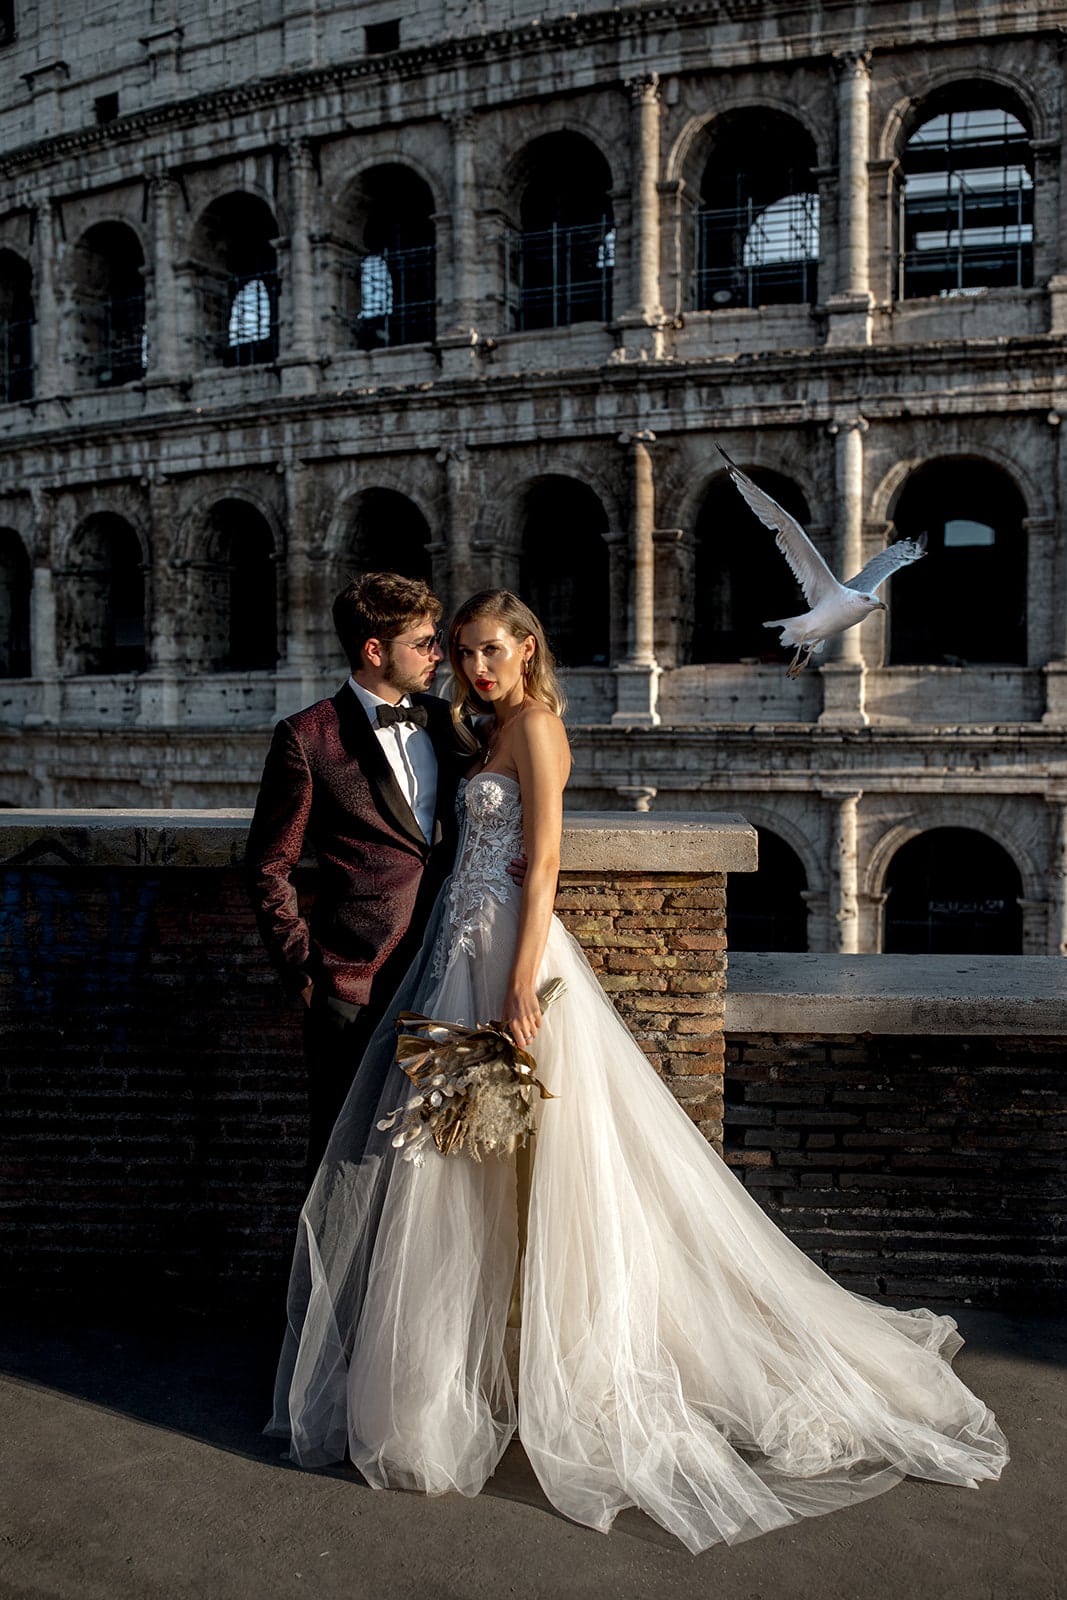 Bride and groom stand together in front of Coliseum in Rome, Italy